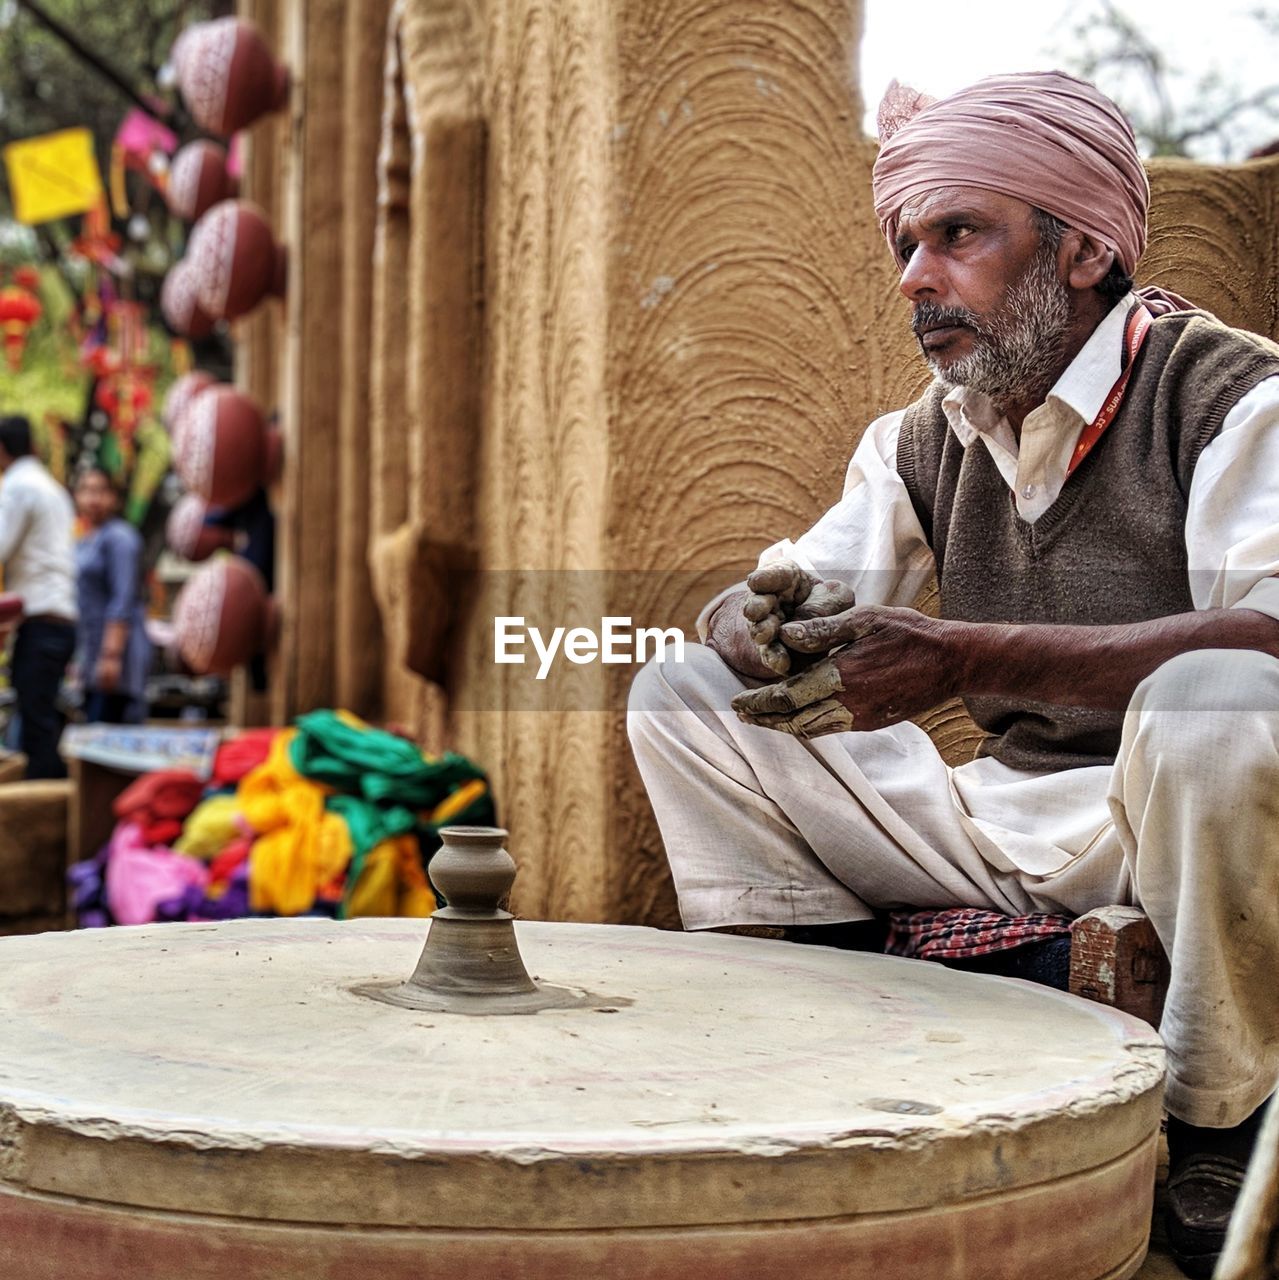 Man working on pottery wheel at market